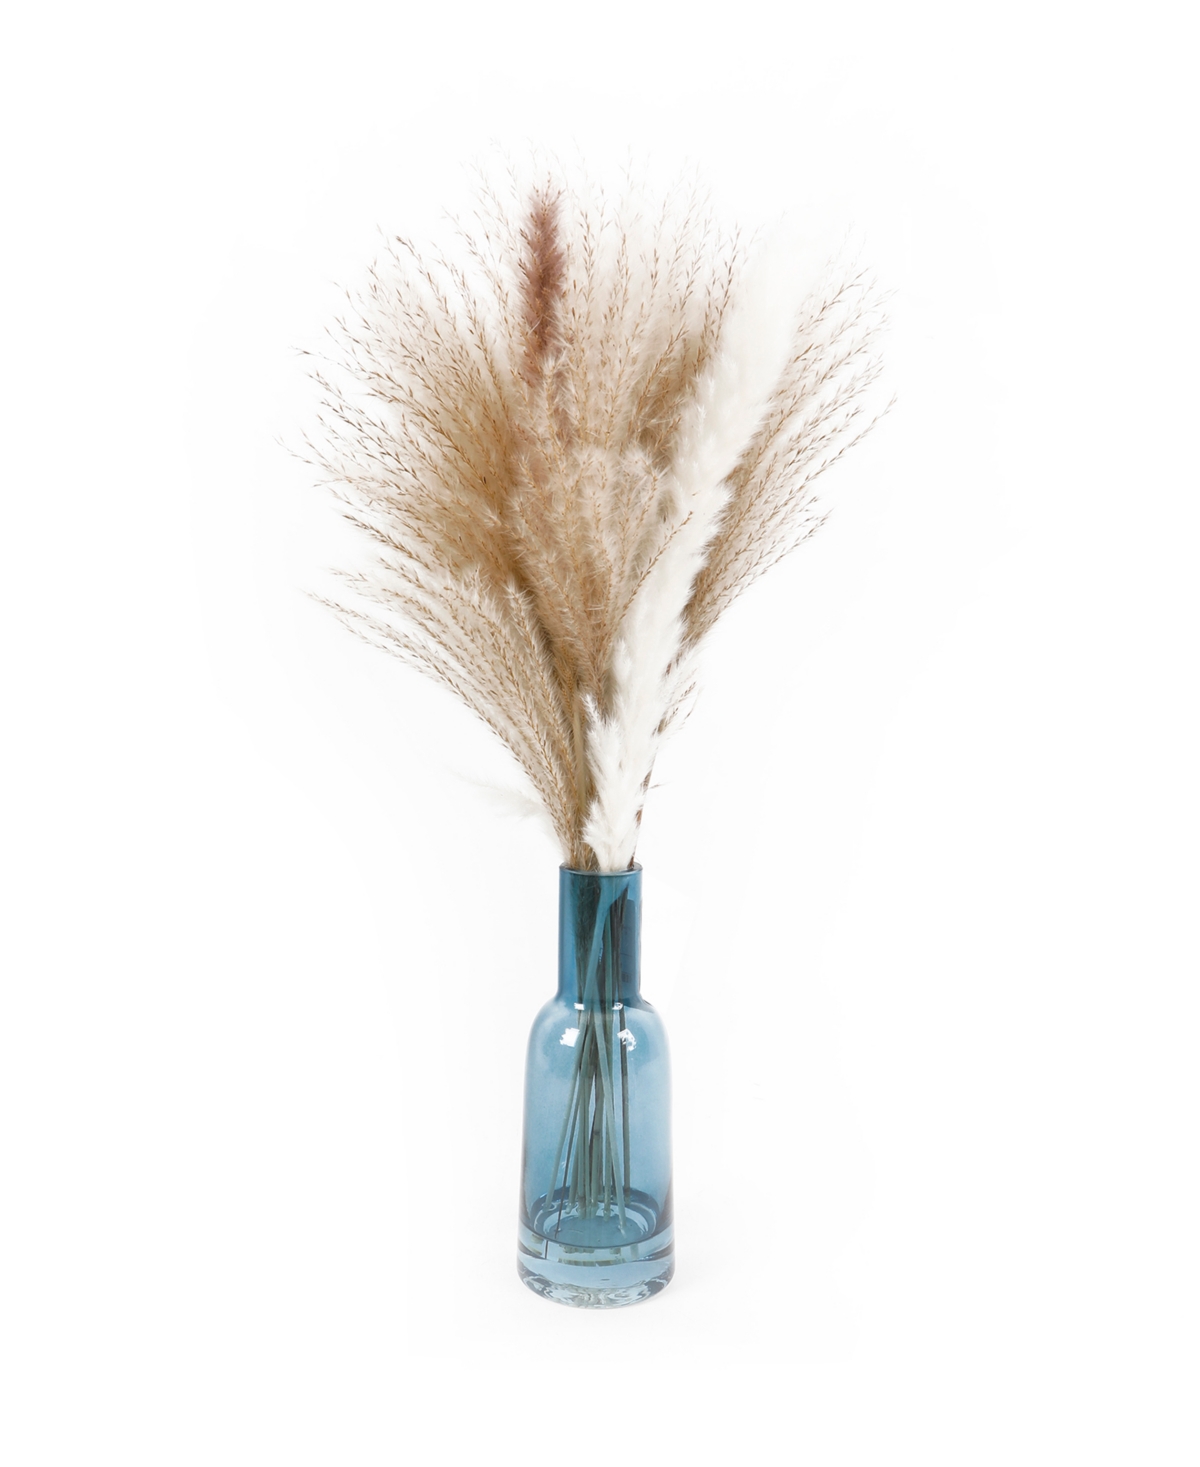 19.75" H Pampas Grass Mix in 7.65" H Glass with Fake Water - Blue